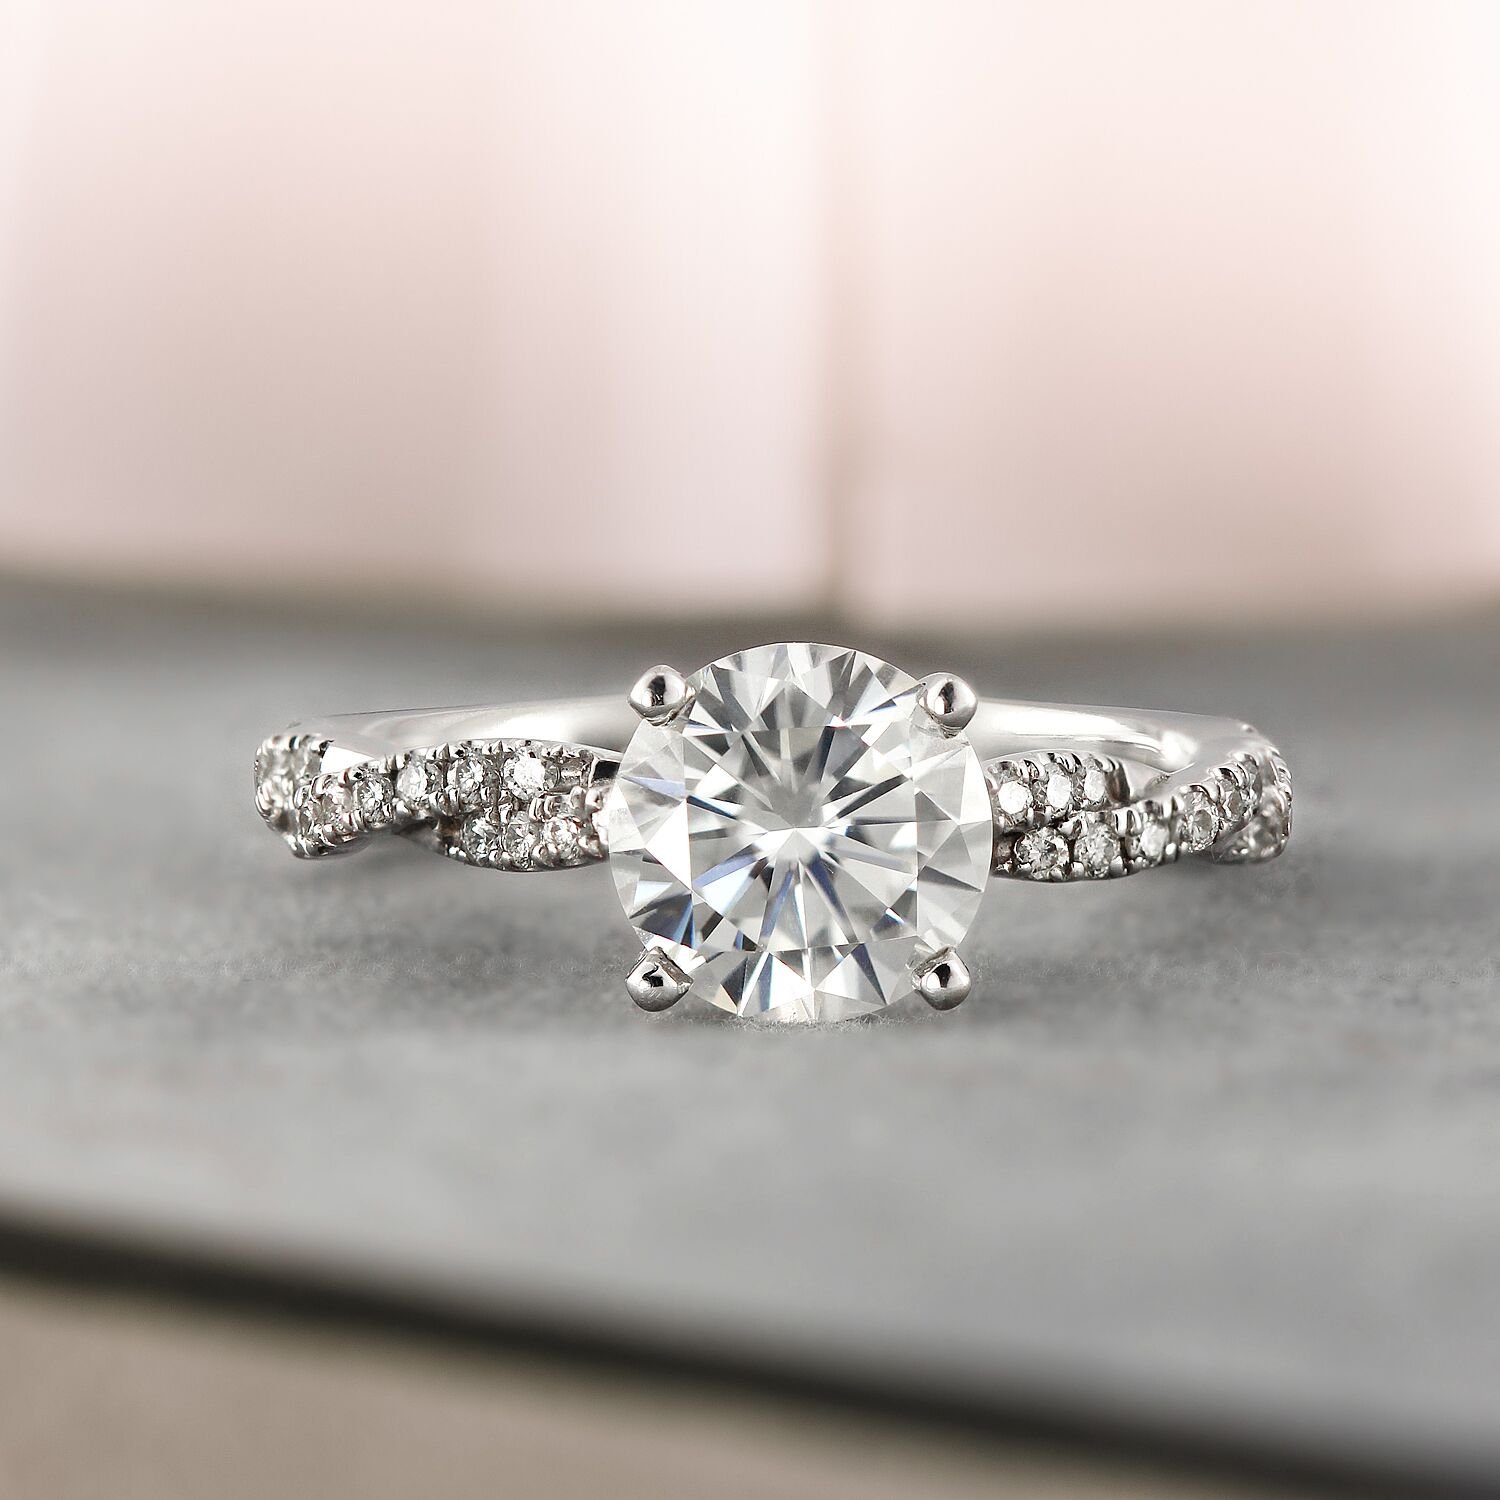 Lab-Grown Diamonds and Natural Diamonds –What are the Differences?